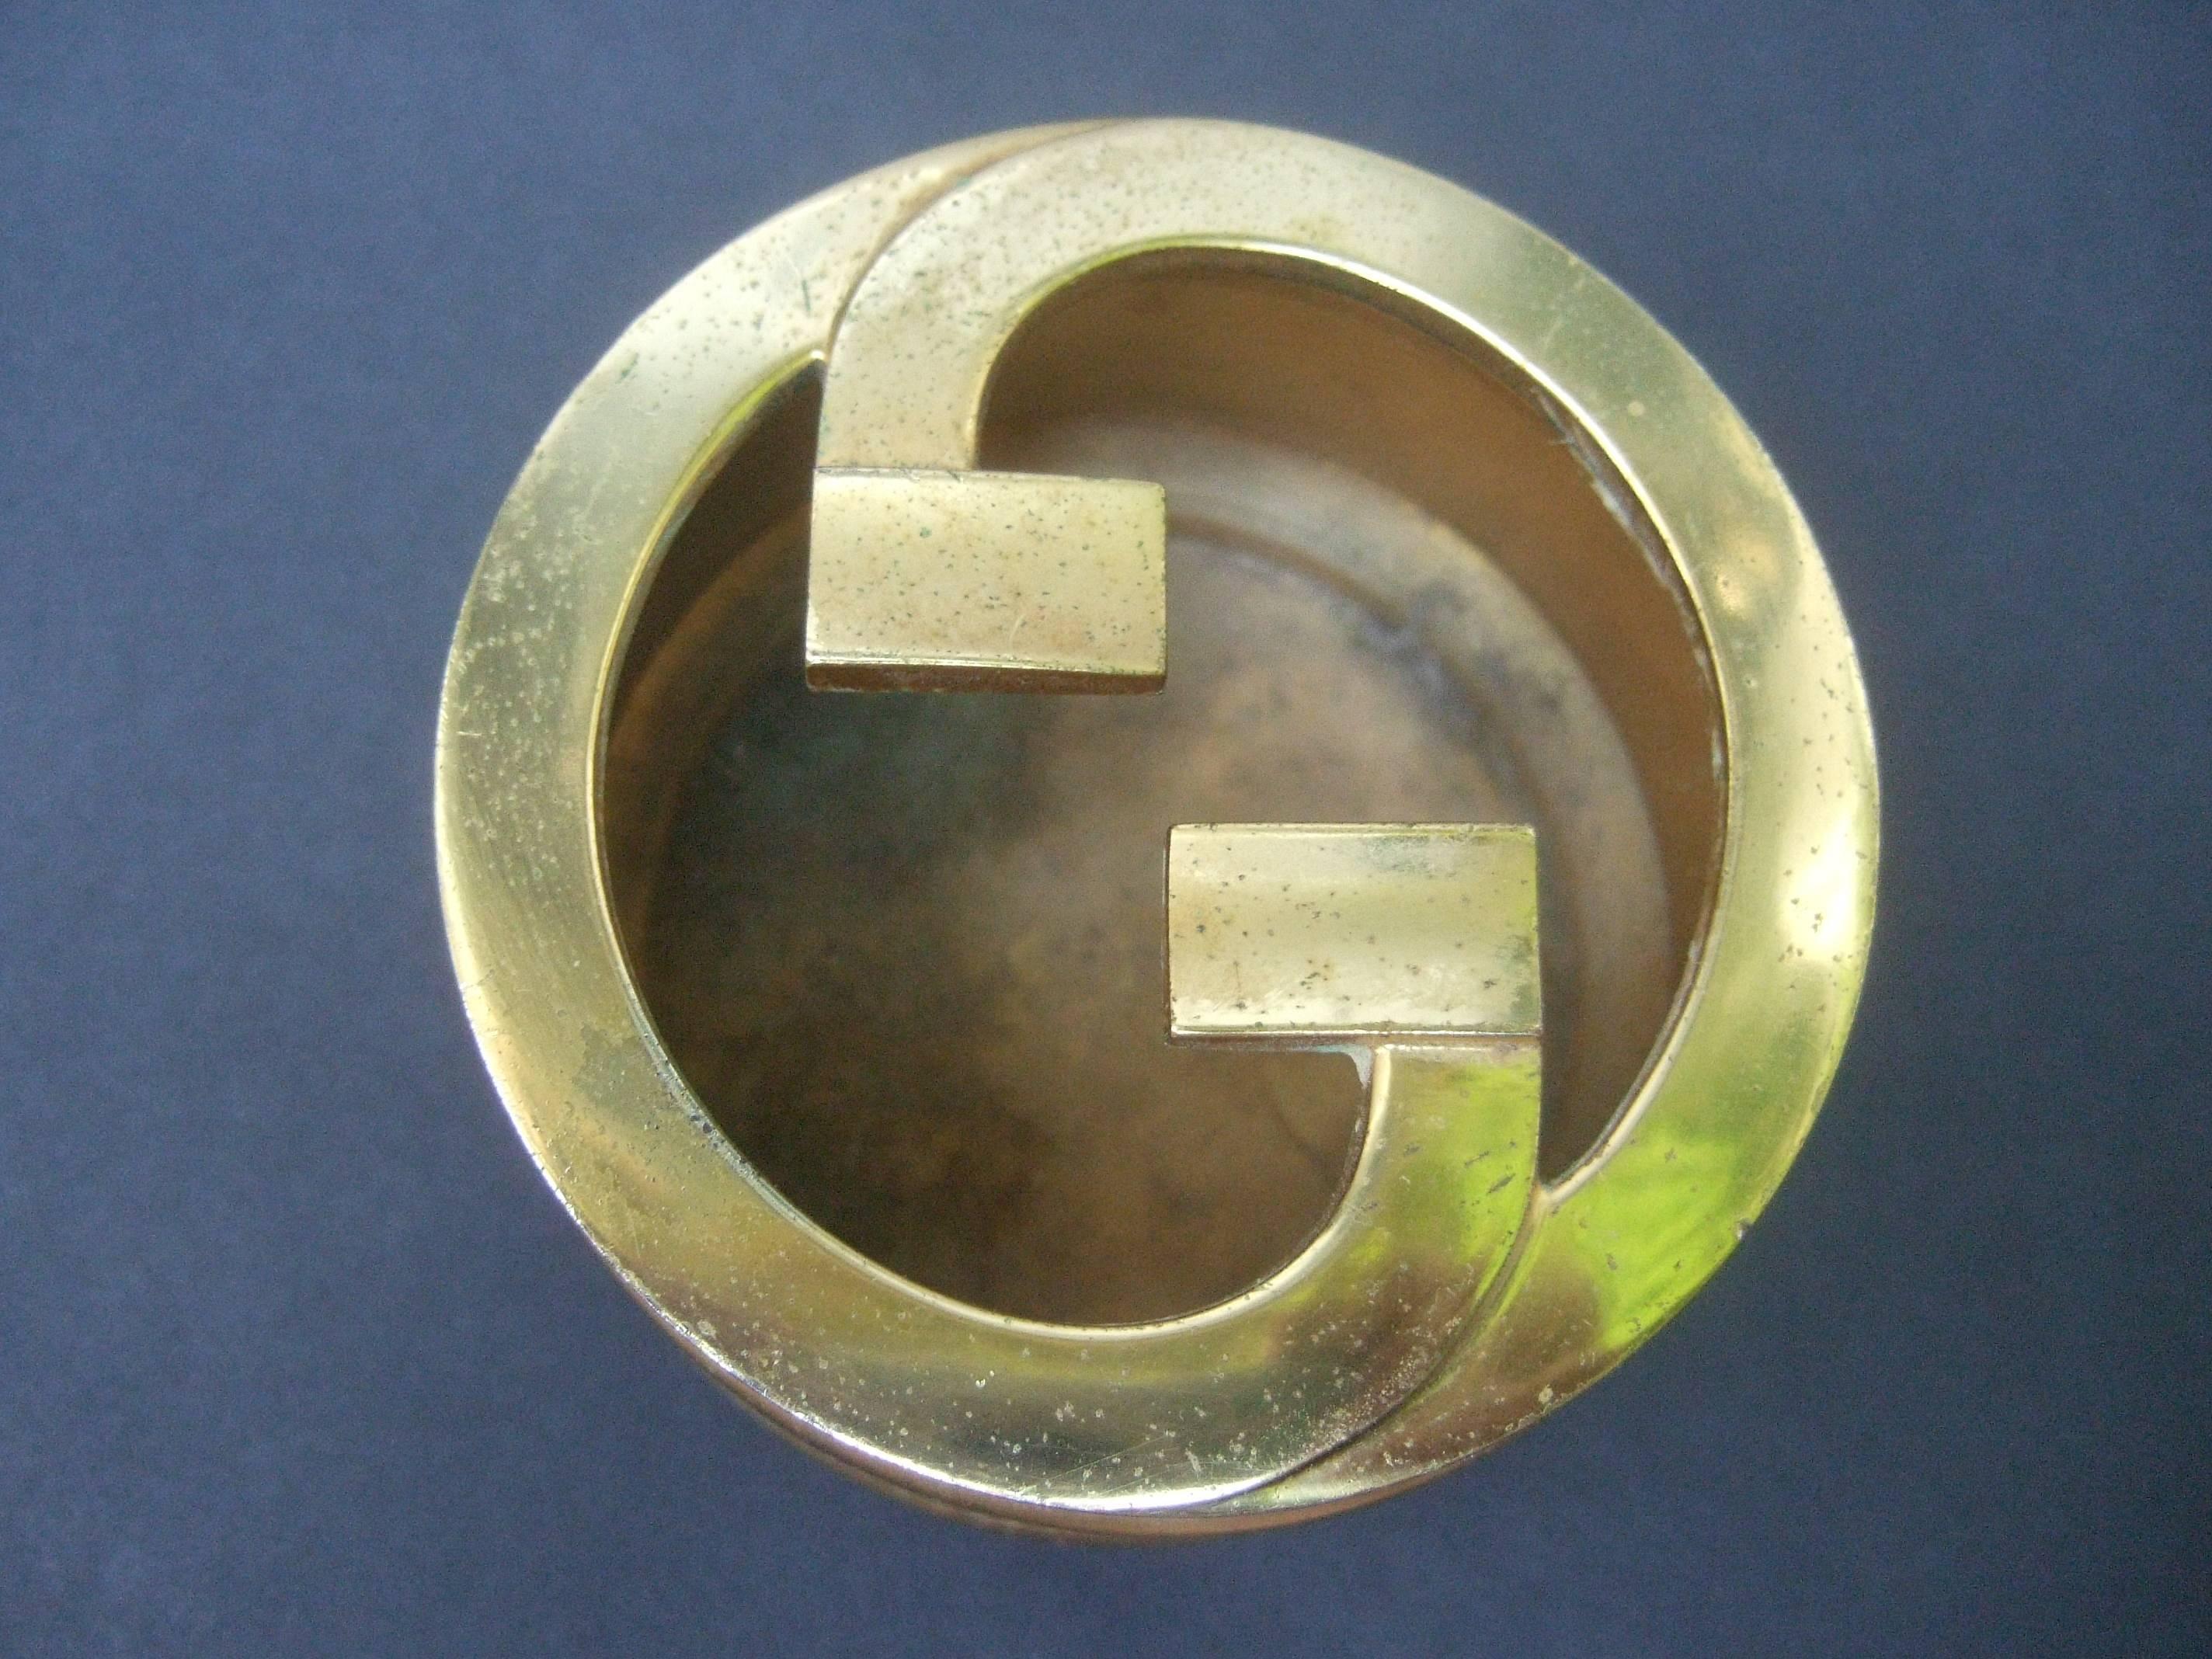 Gucci Sleek gilt metal G.G. initial ash tray c 1970s
The elegant Italian ash tray is designed 
with Gucci's massive gilt metal interlocked
G.G. initials

The sides of the ash tray are covered with
Gucci's signature brown coated canvas